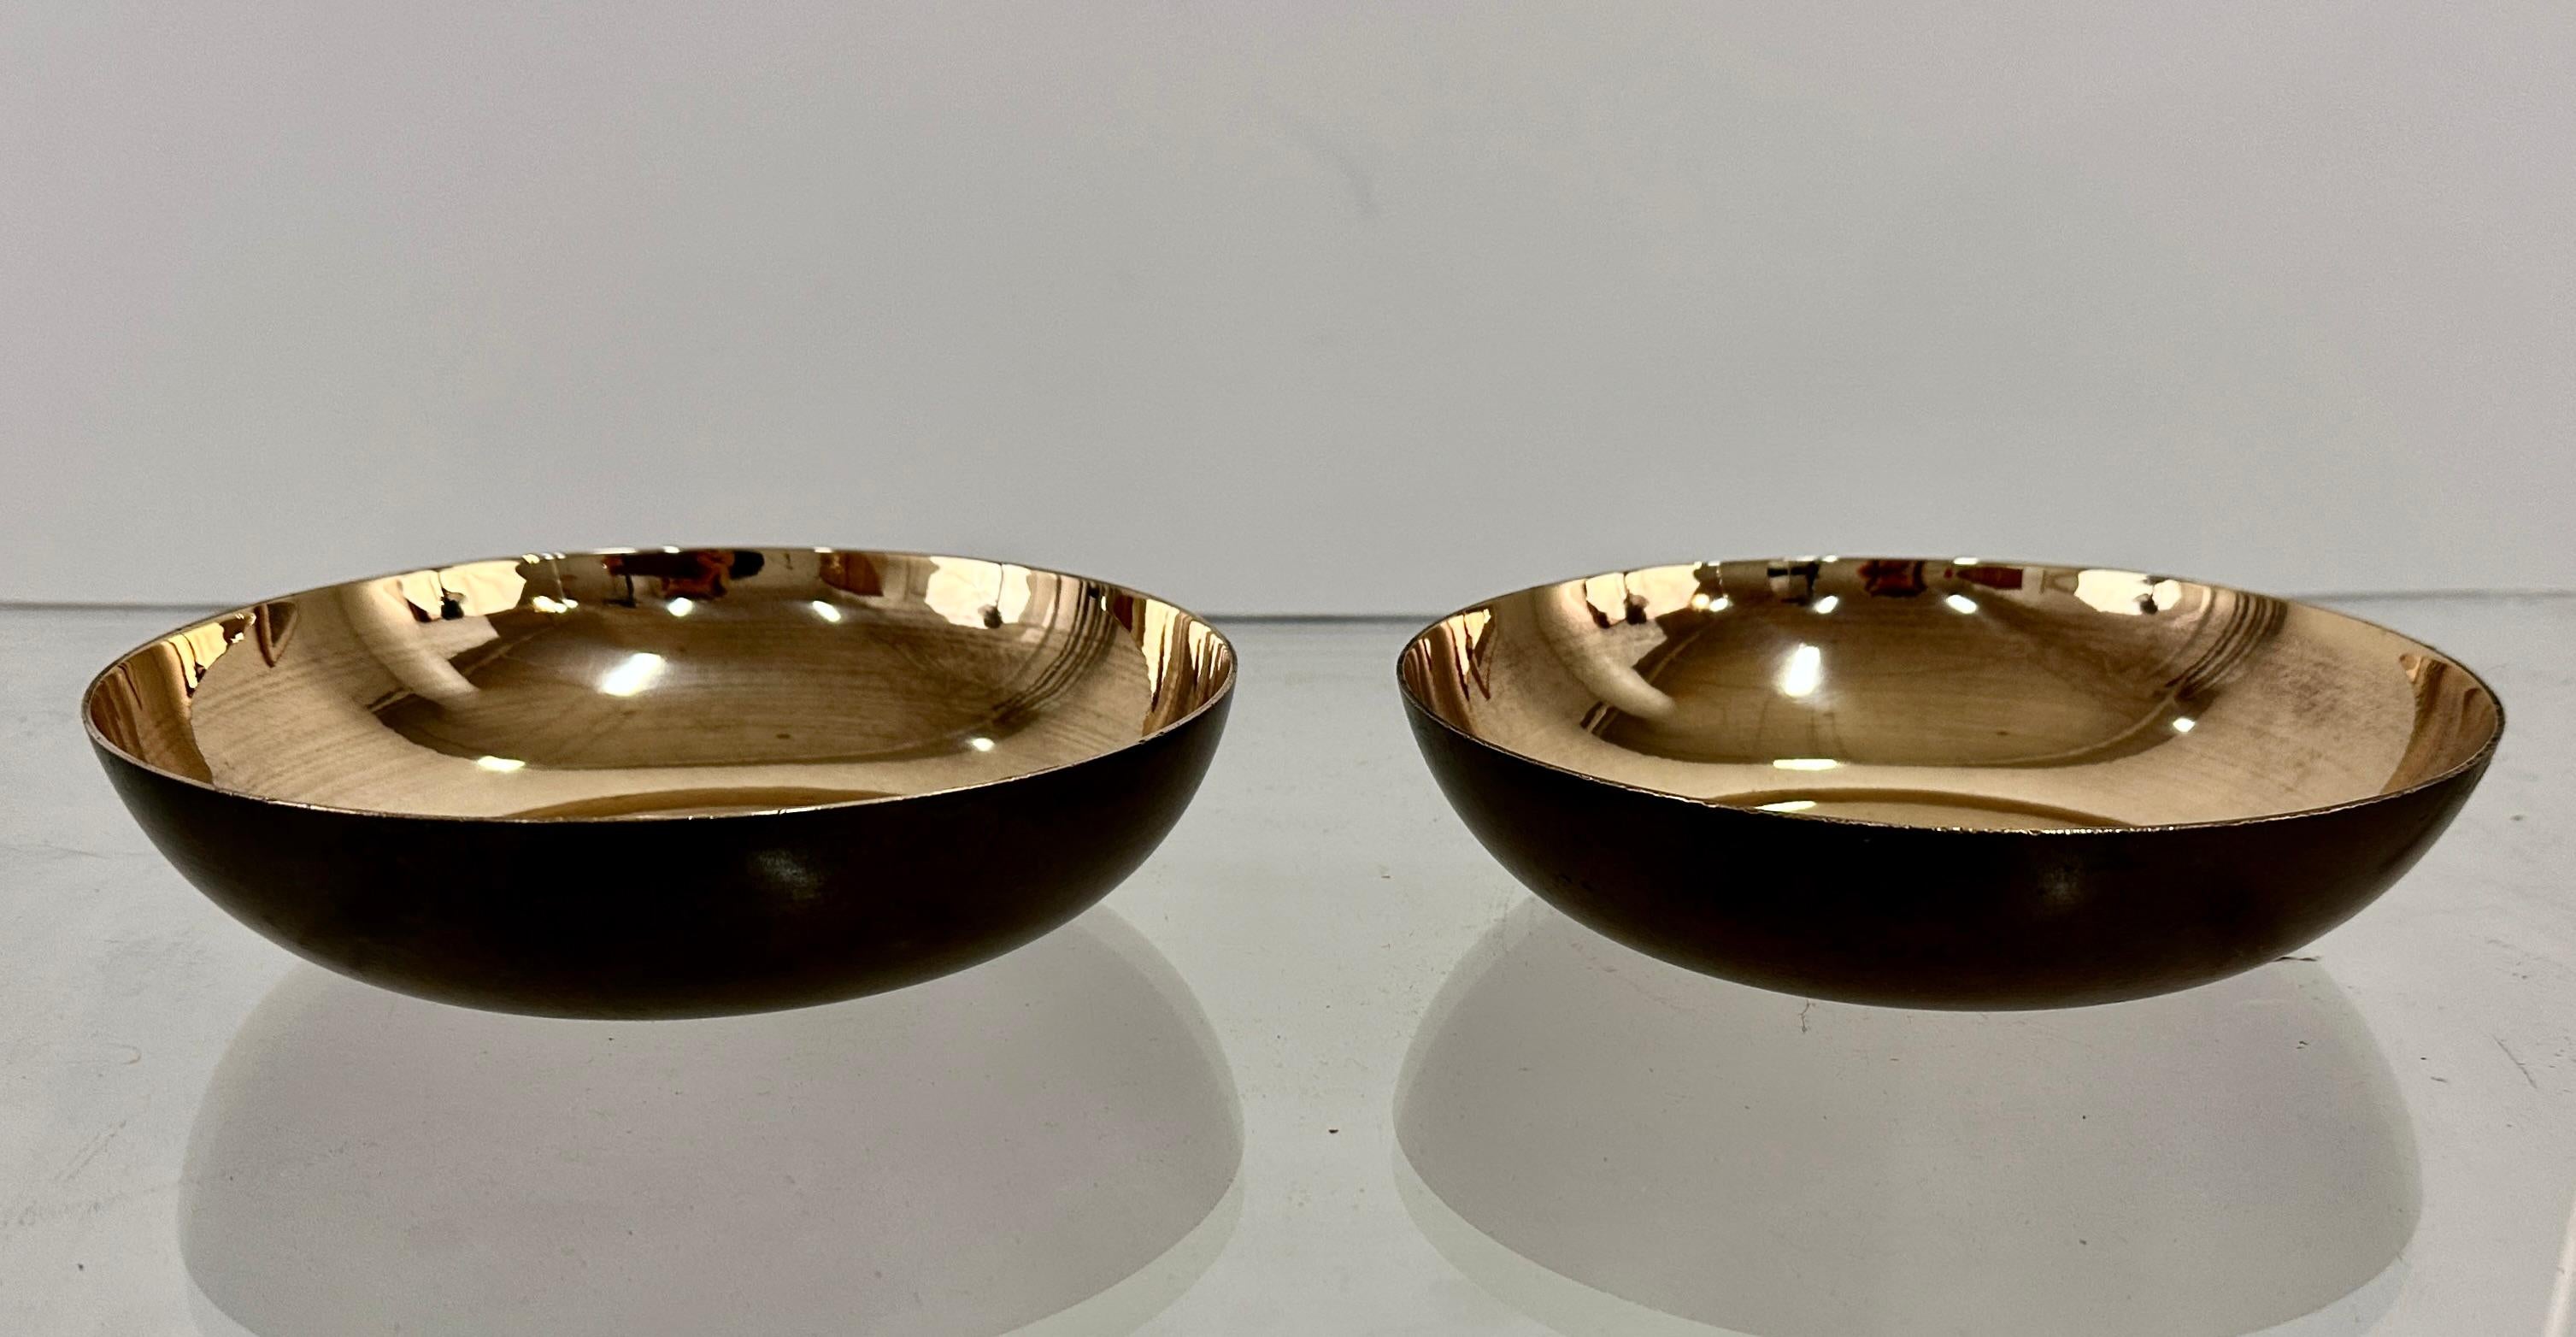 A pair of patinated bronze bowls with polished interiors by noted Arts and Crafts metalworker Carl Sorensen. Sorensen produced most of his work in Philadelphia in the early 20th century, and later became a designer for Tiffany Studios in New York.